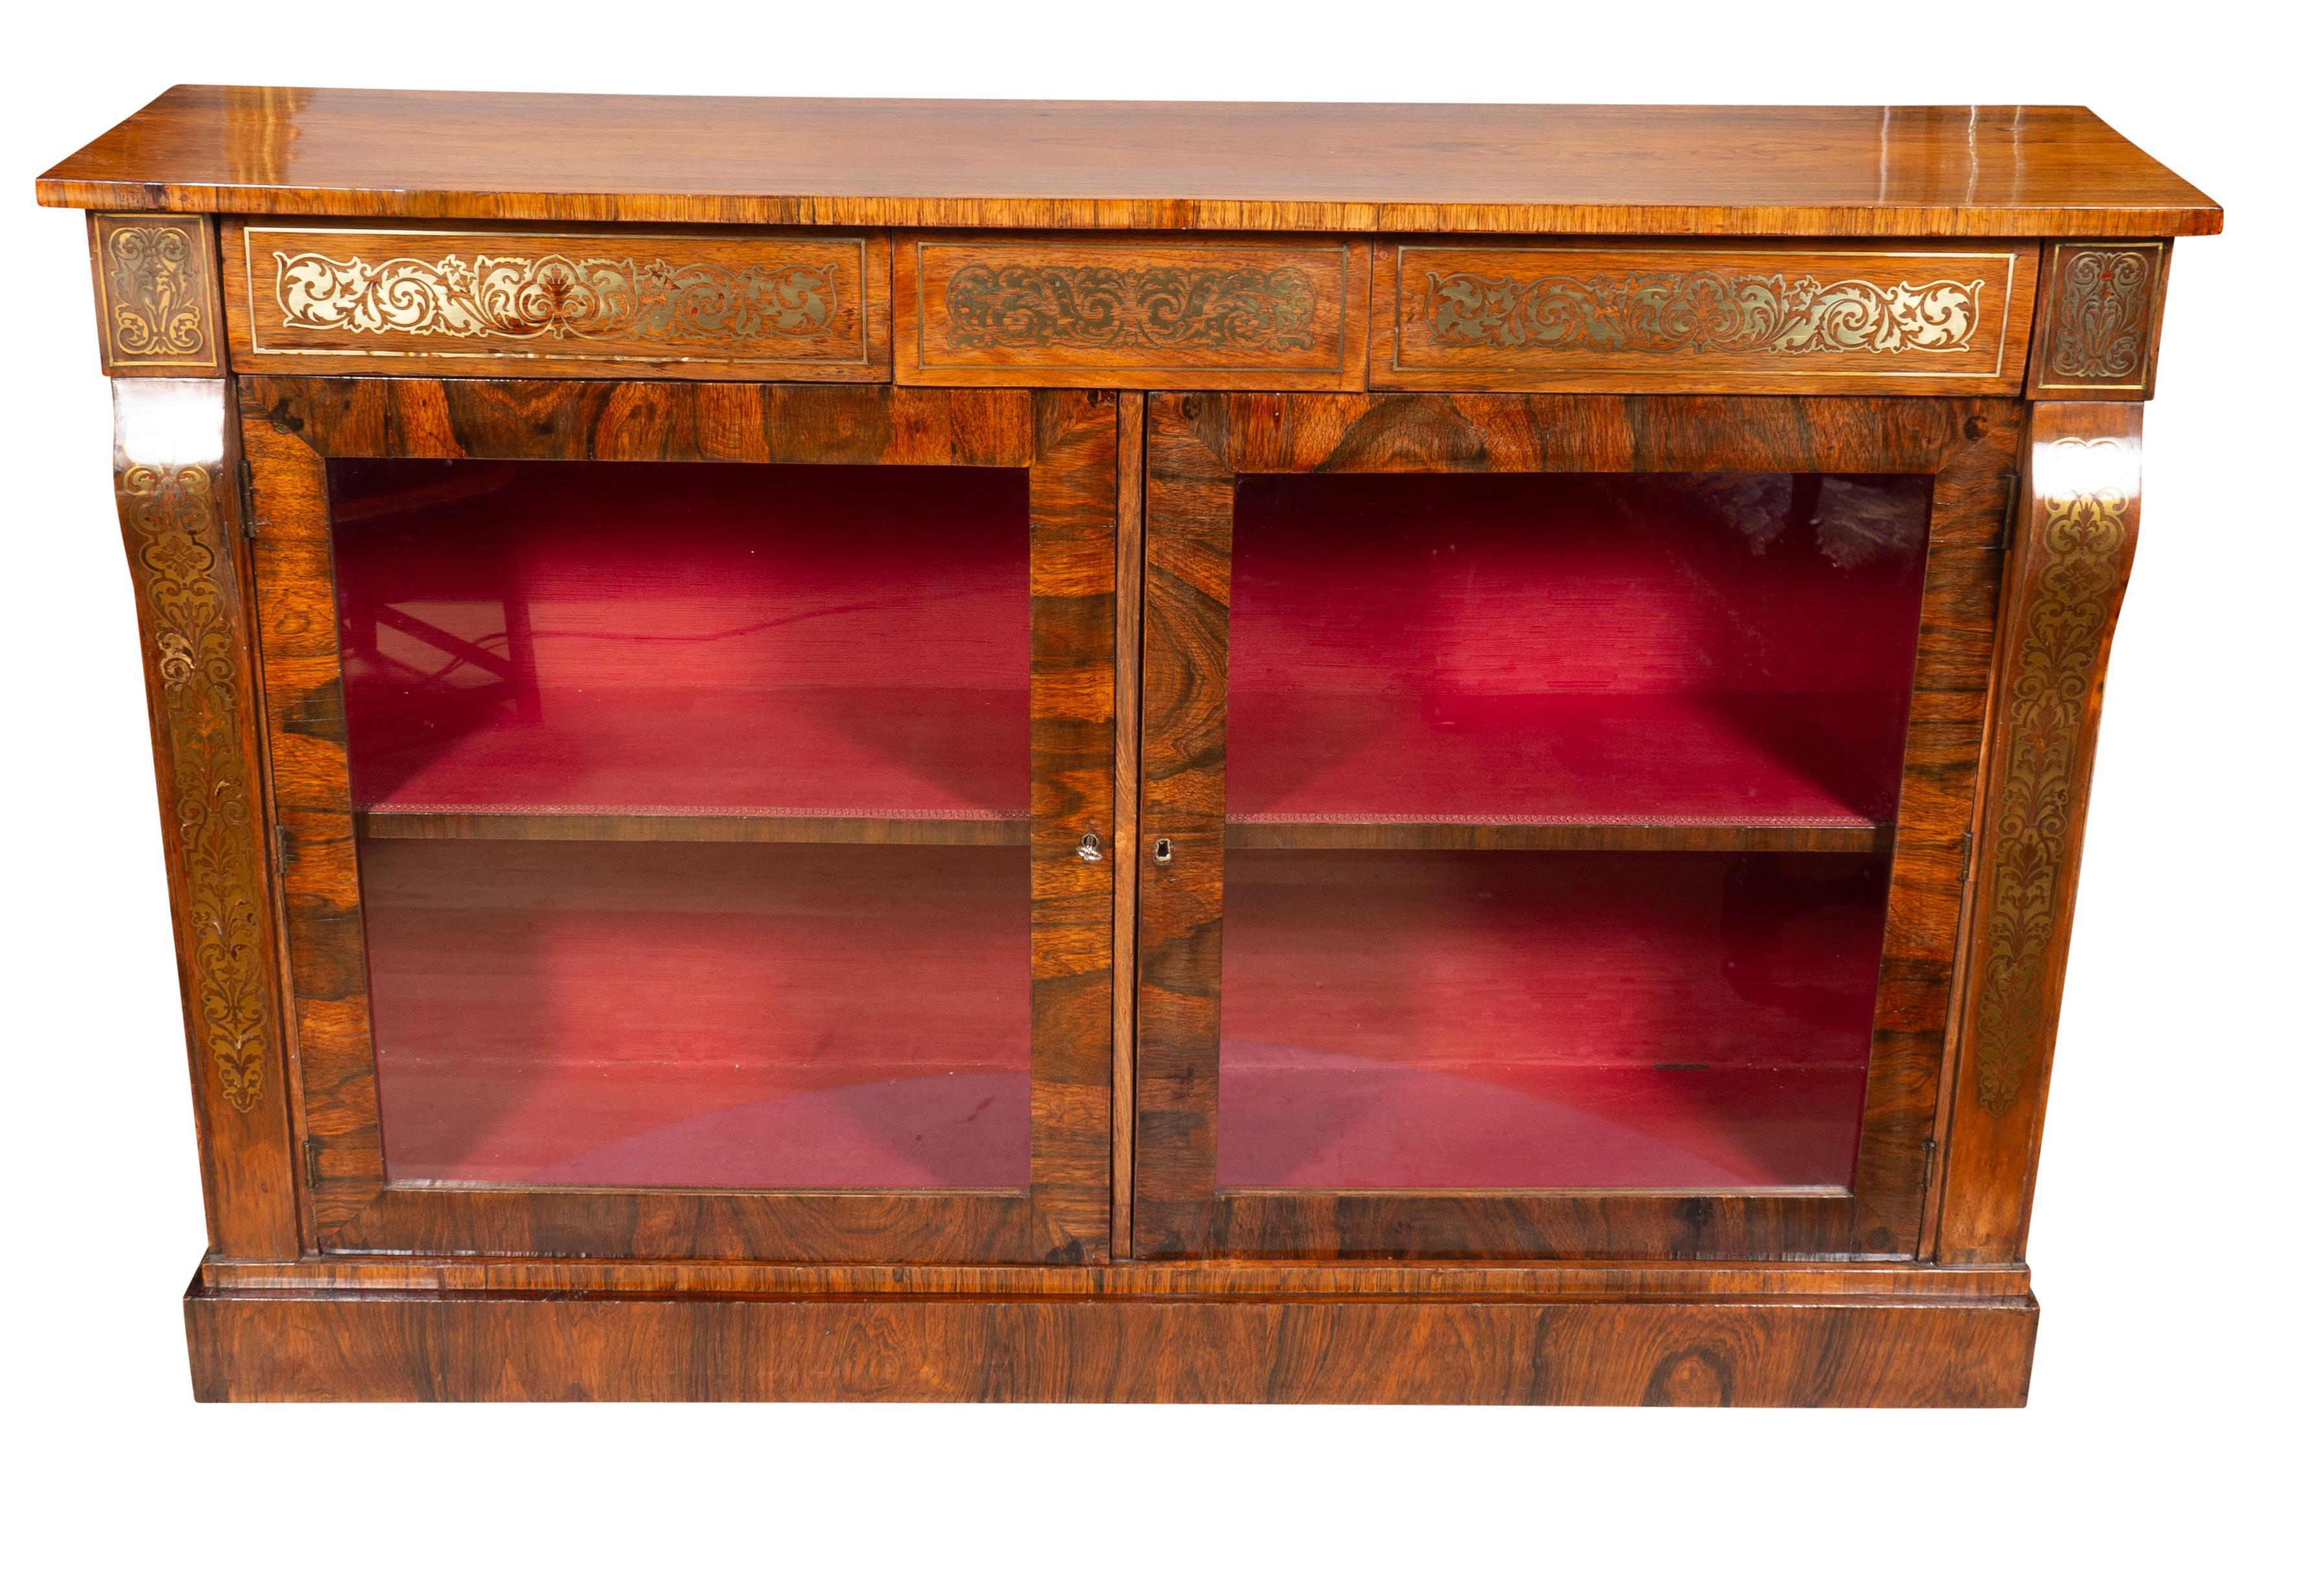 With a rectangular top over a brass inlaid frieze with two drawers over a pair of cabinet doors with key. Plinth base. One shelf.